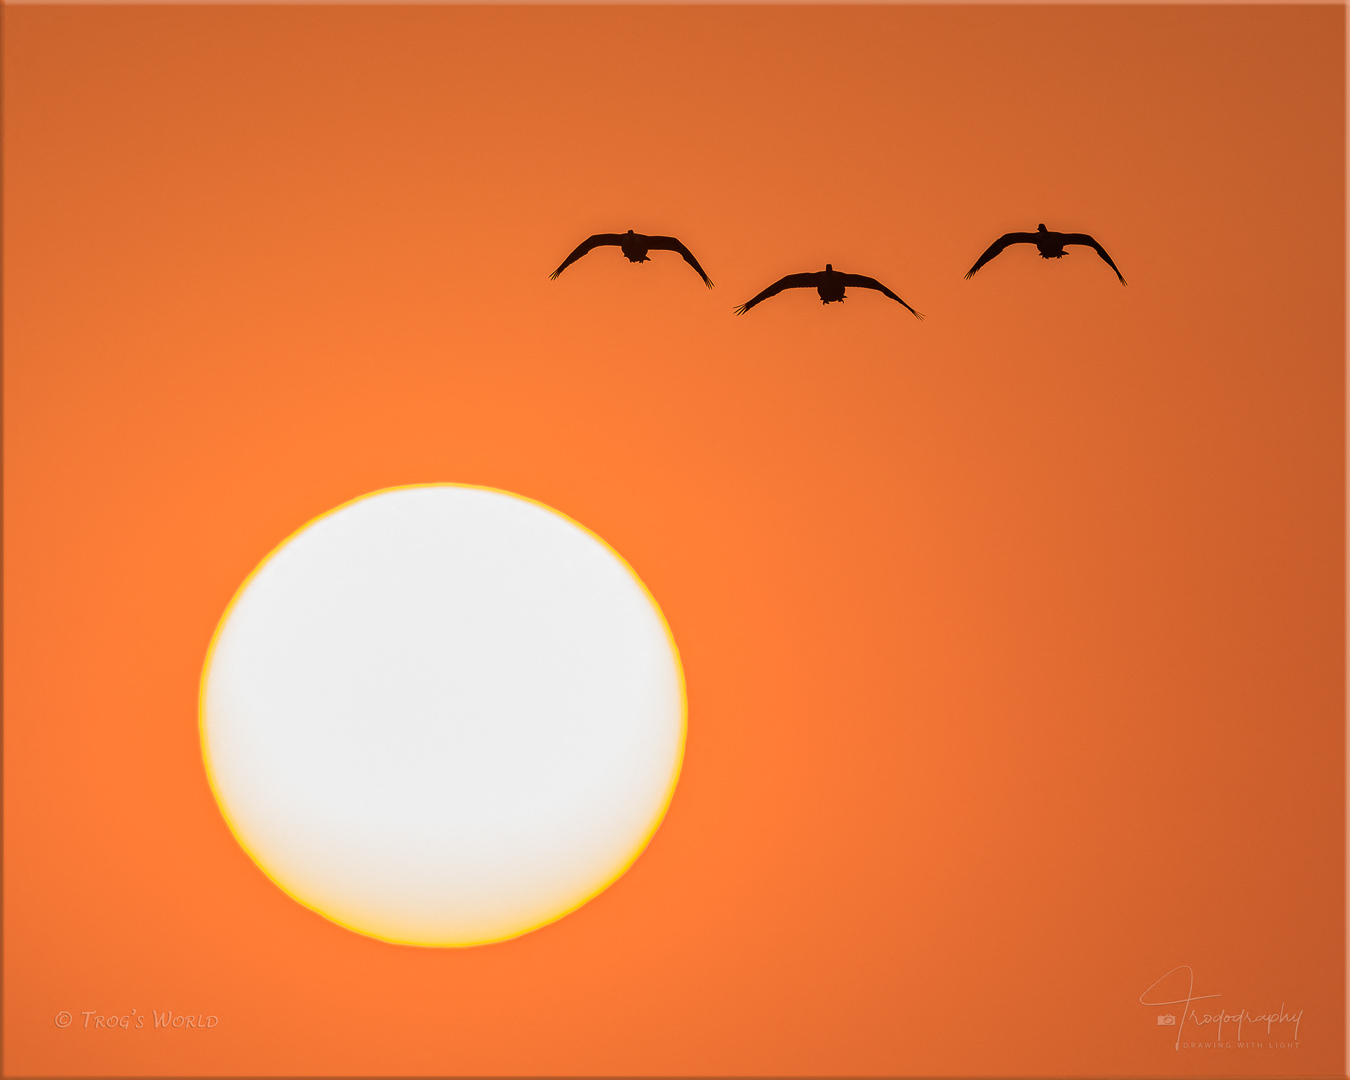 Three Canada Geese flying with the sun